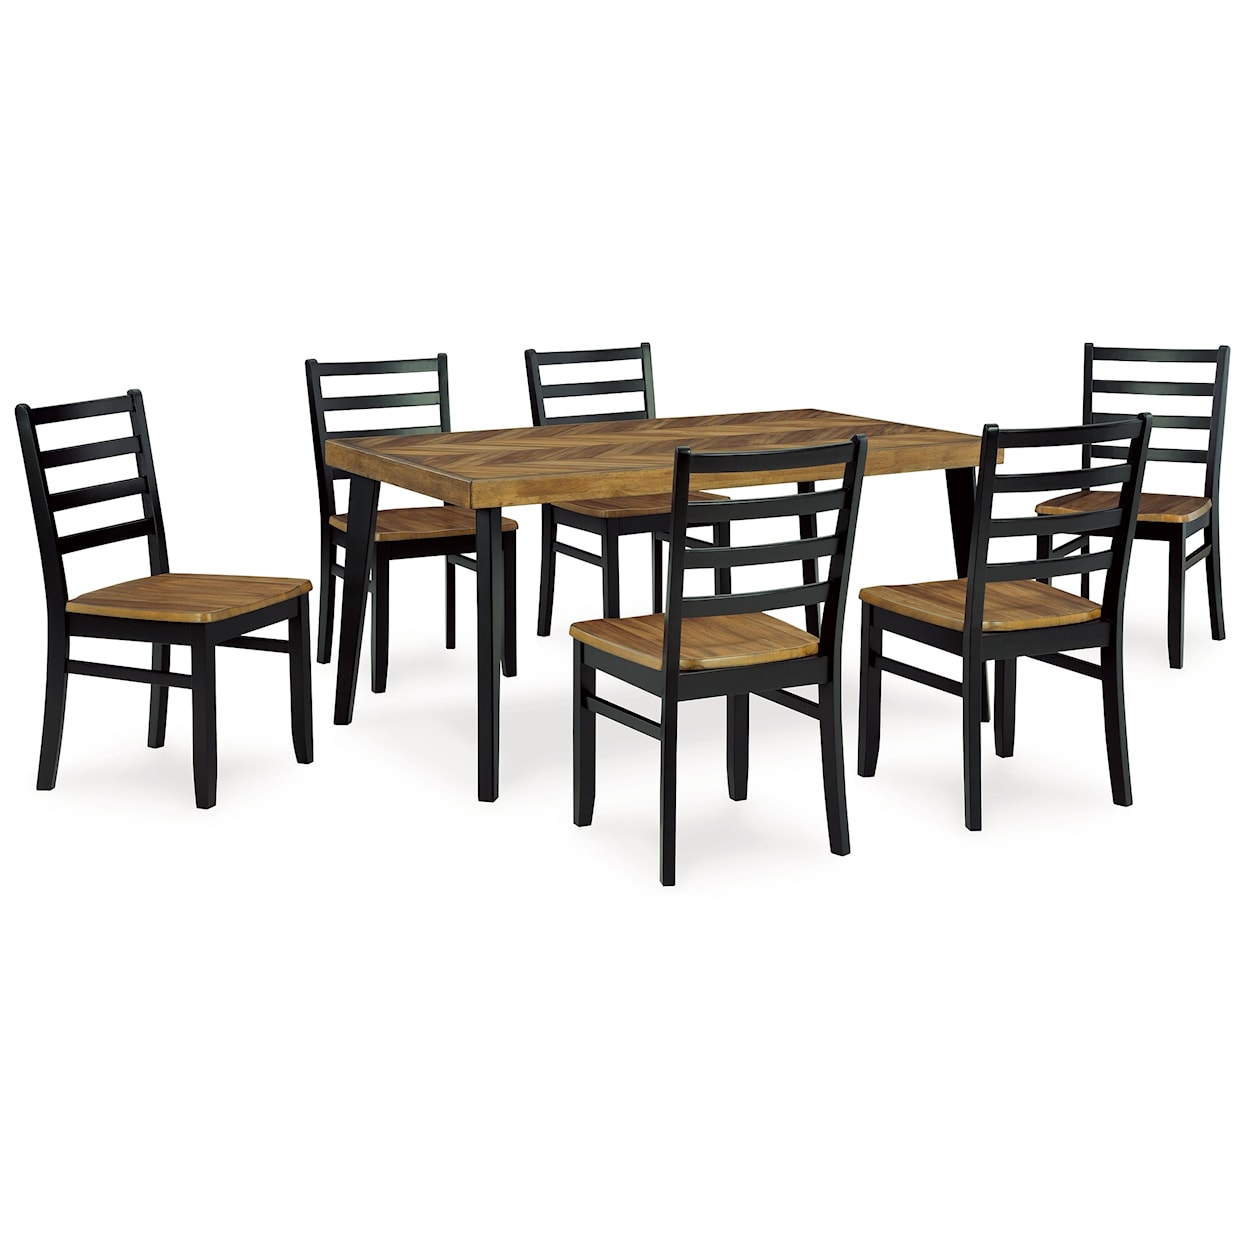 Benchcraft Blondon Dining Table And 6 Chairs (Set Of 7)